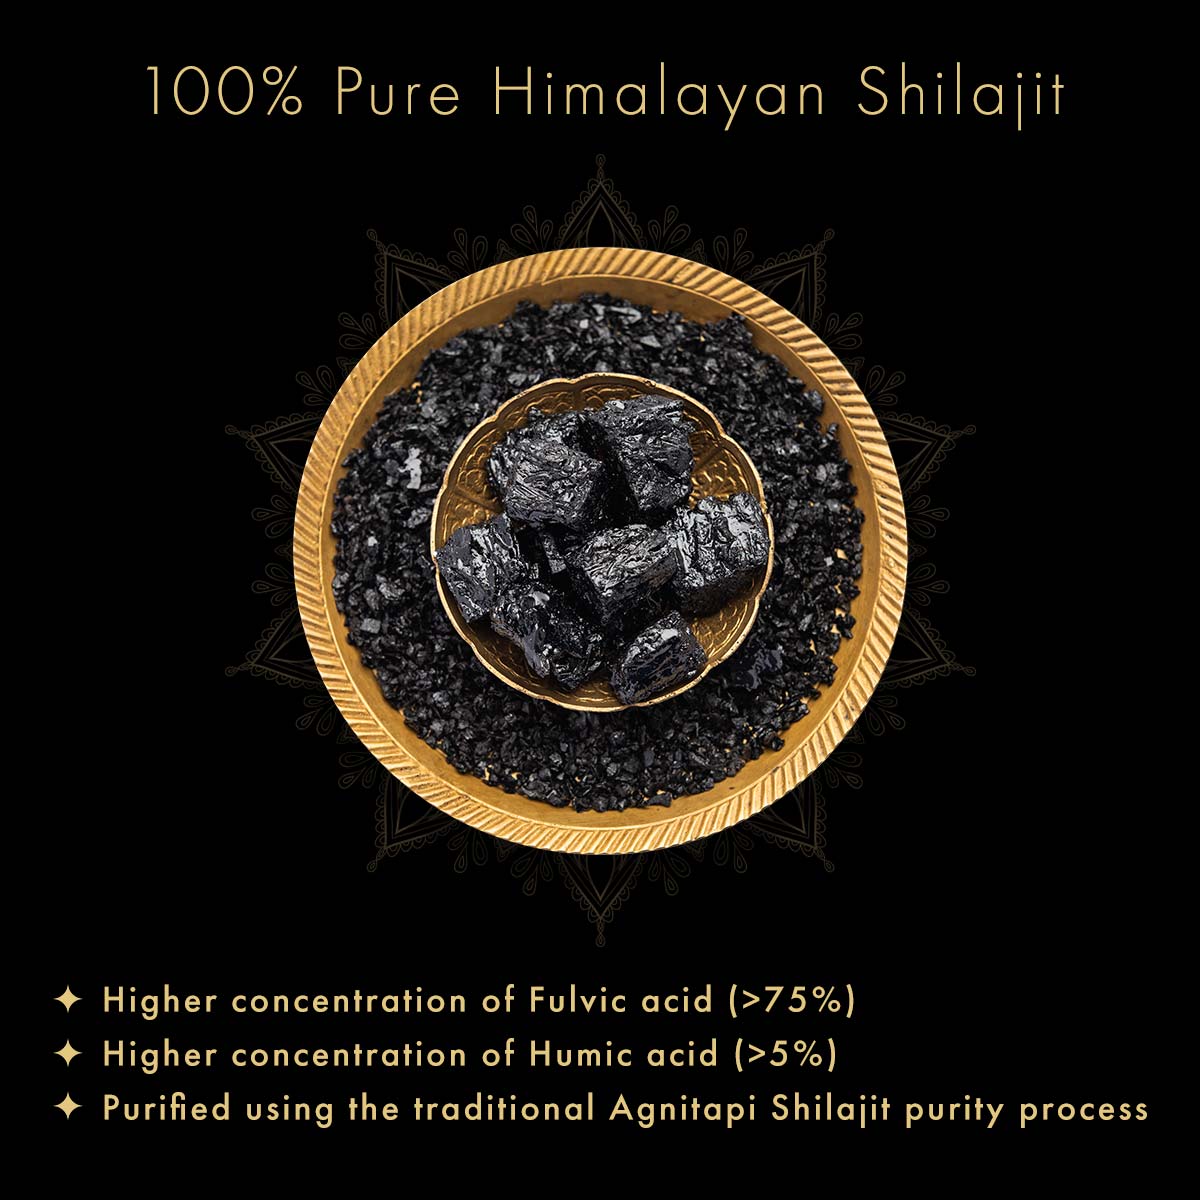 Herbo24Turbo Shilajit Resin: Made From 100% Pure Himalayan Shilajit To Help Boost Stamina, Strength & Energy